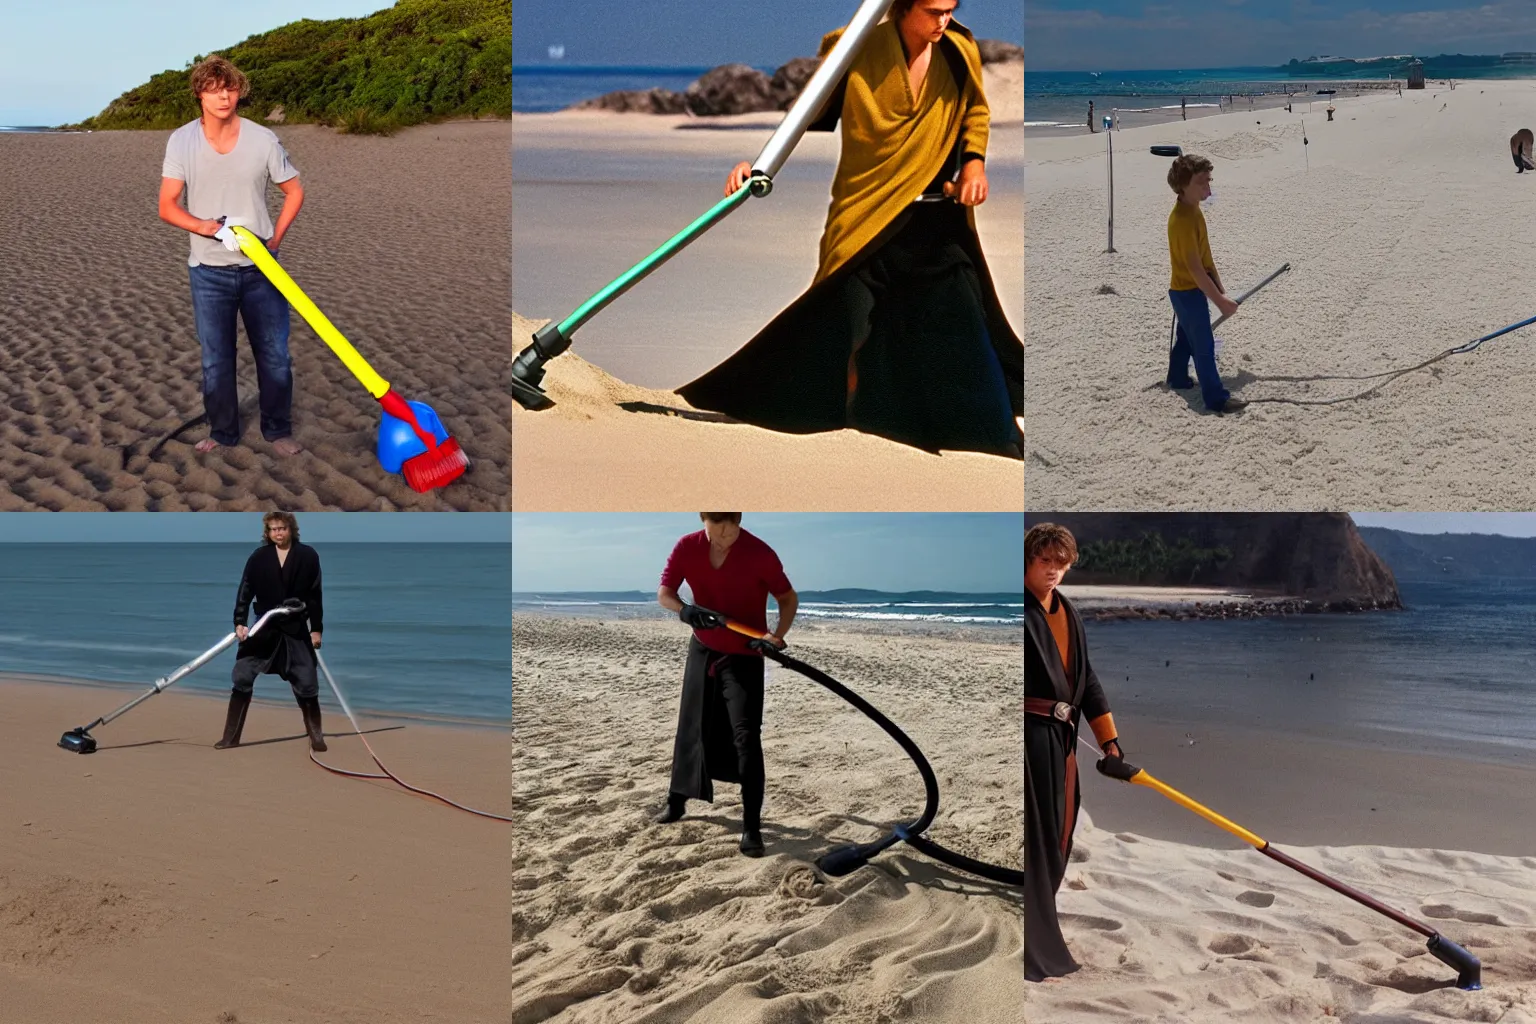 Image similar to Anakin Skywalker vacuuming the beach to remove sand